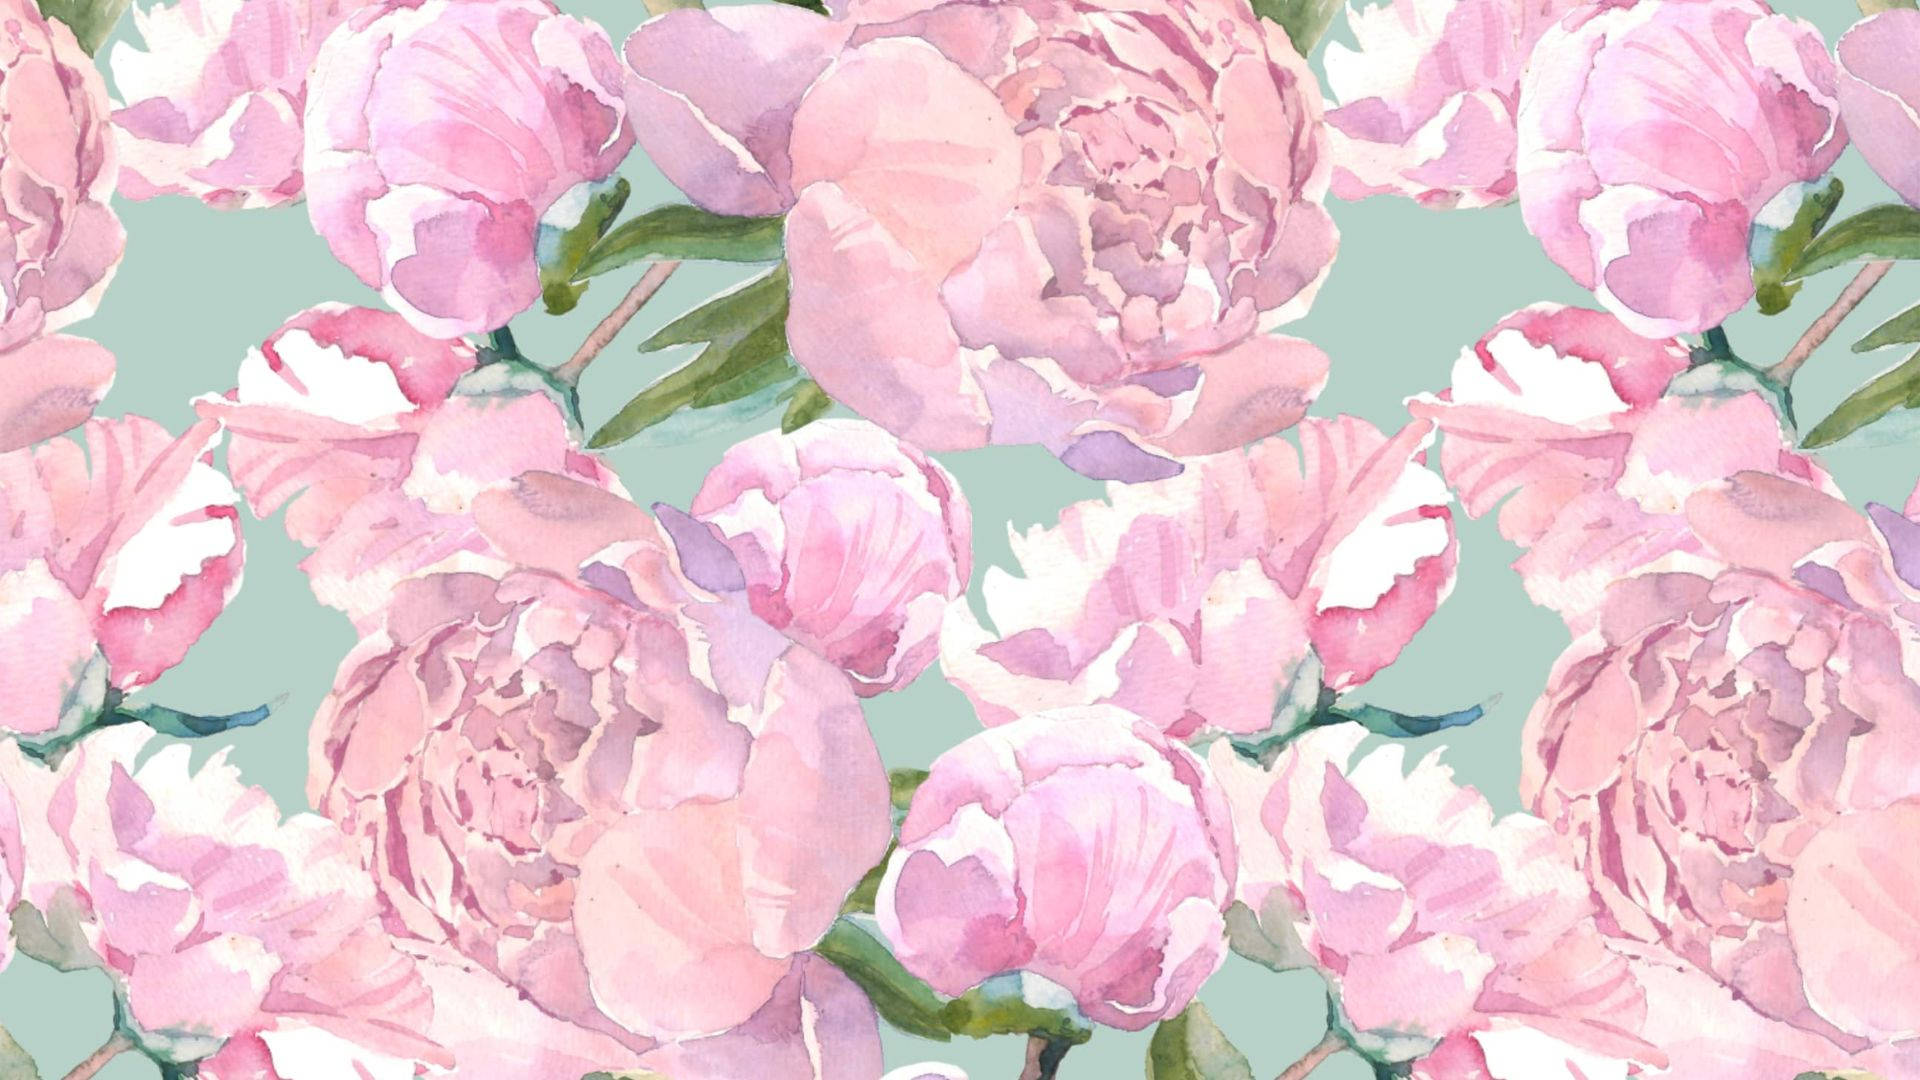 Aesthetic Pink Flowers With Leaves Background